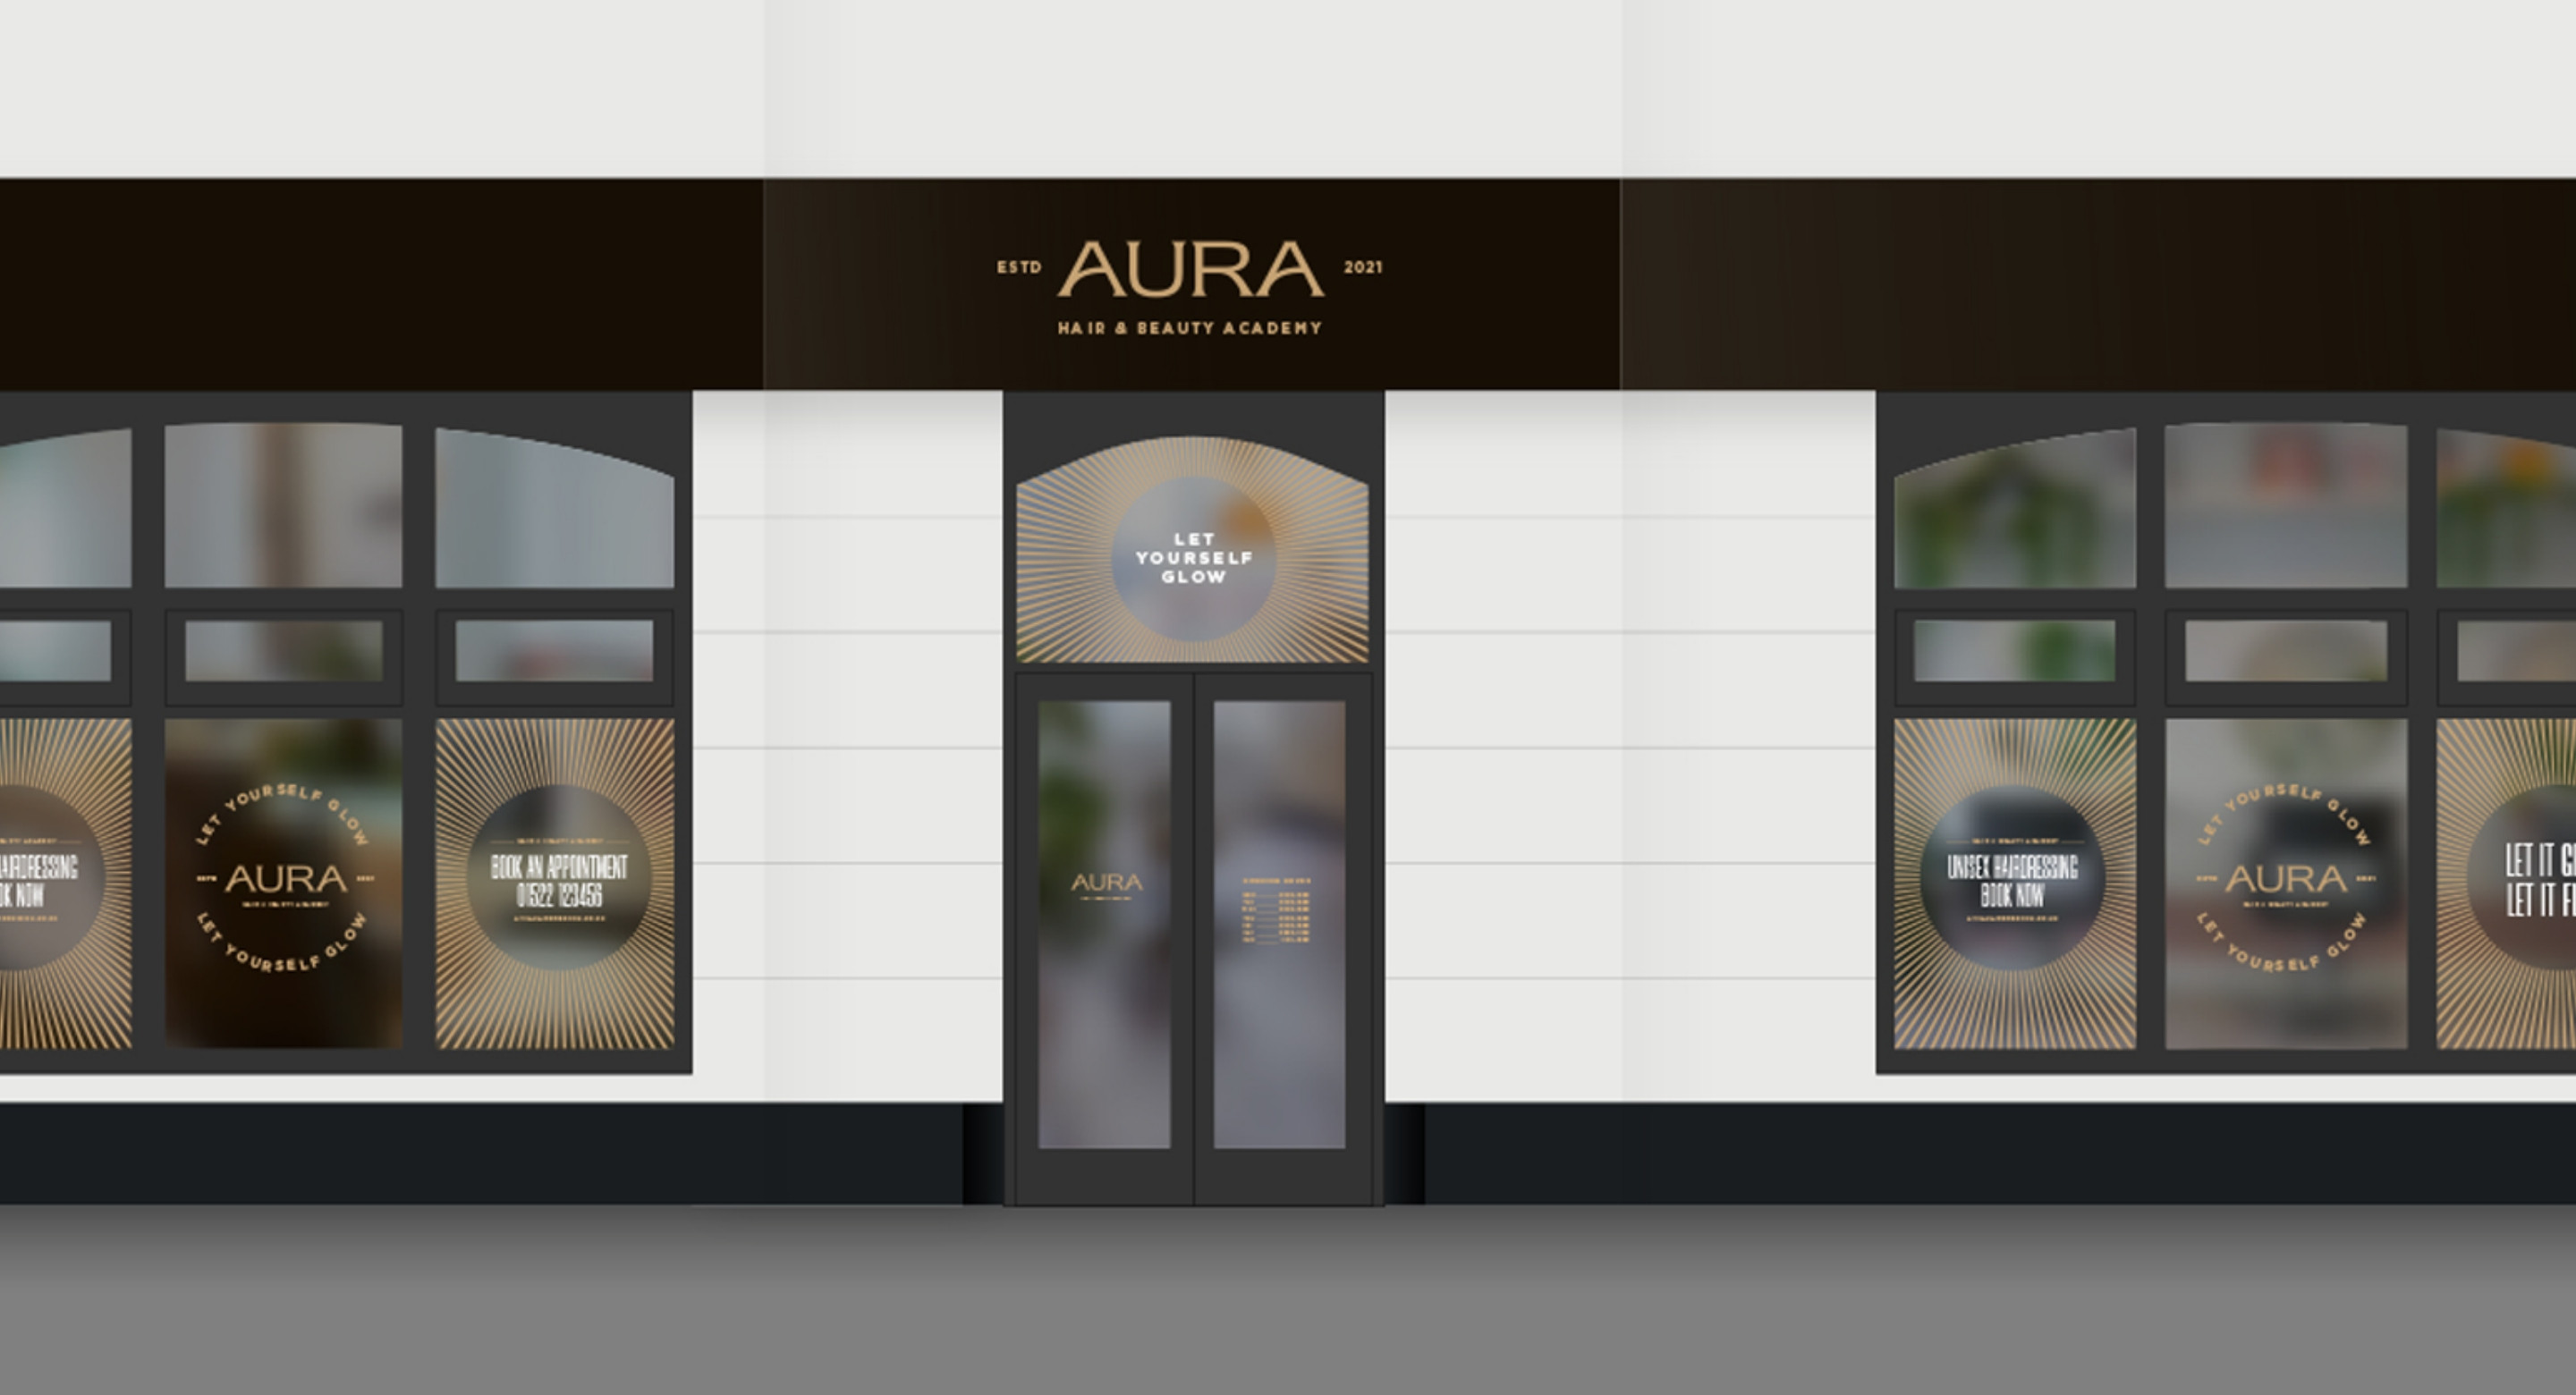 AURA Hair & Beauty retail signage fascia design by Root Studio